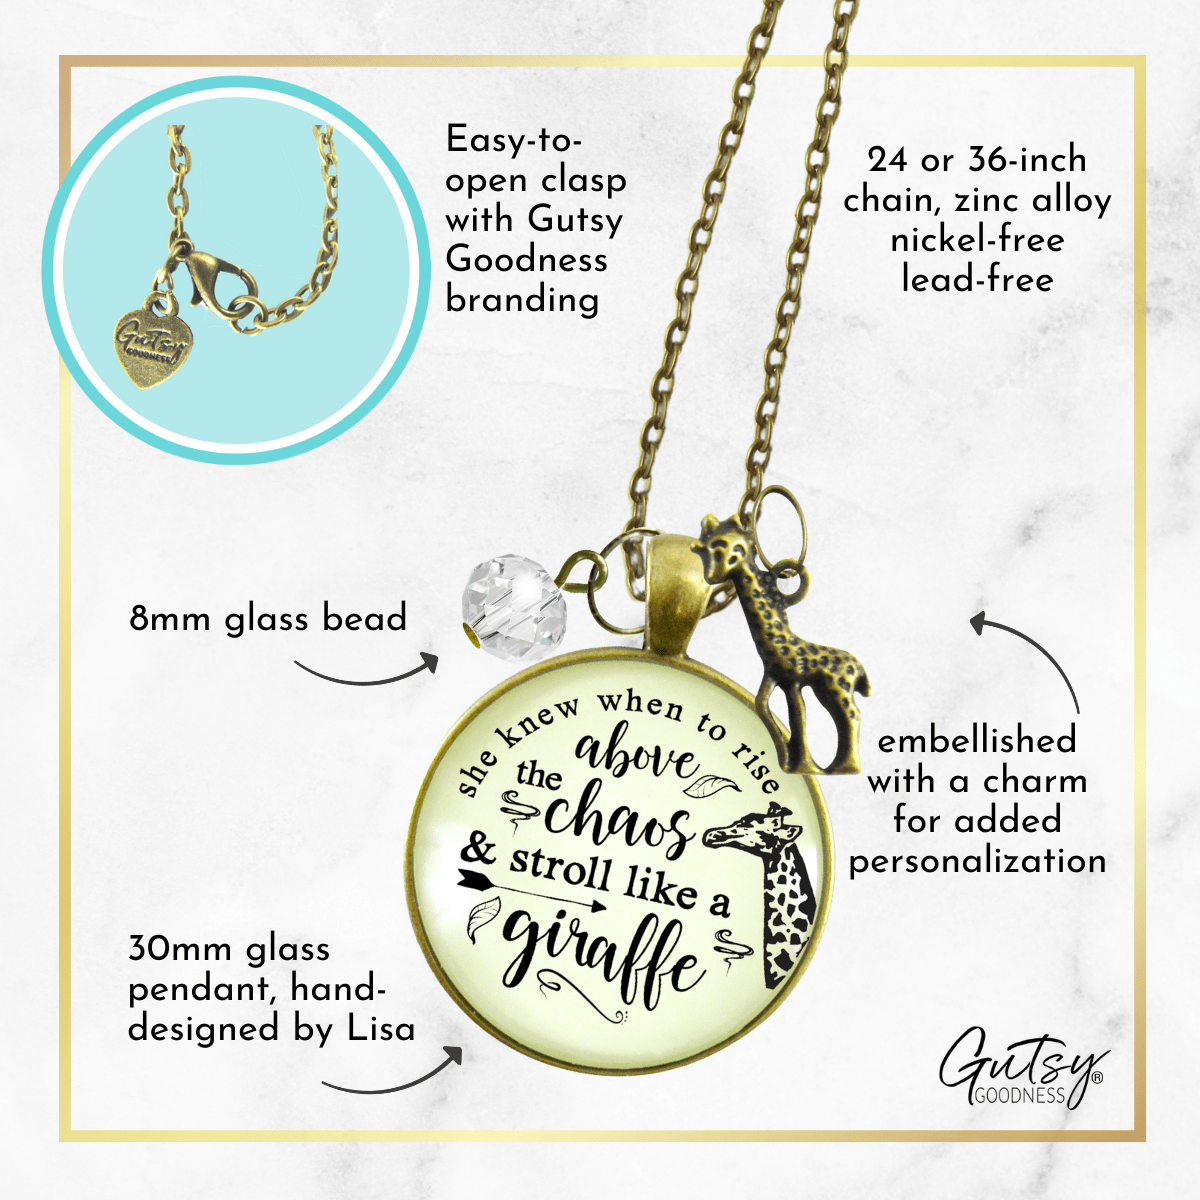 Gutsy Goodness Giraffe Necklace She Knew When To Rise Above Chaos Boho Friendship Jewelry Charm - Gutsy Goodness Handmade Jewelry;Giraffe Necklace She Knew When To Rise Above Chaos Boho Friendship Jewelry Charm - Gutsy Goodness Handmade Jewelry Gifts